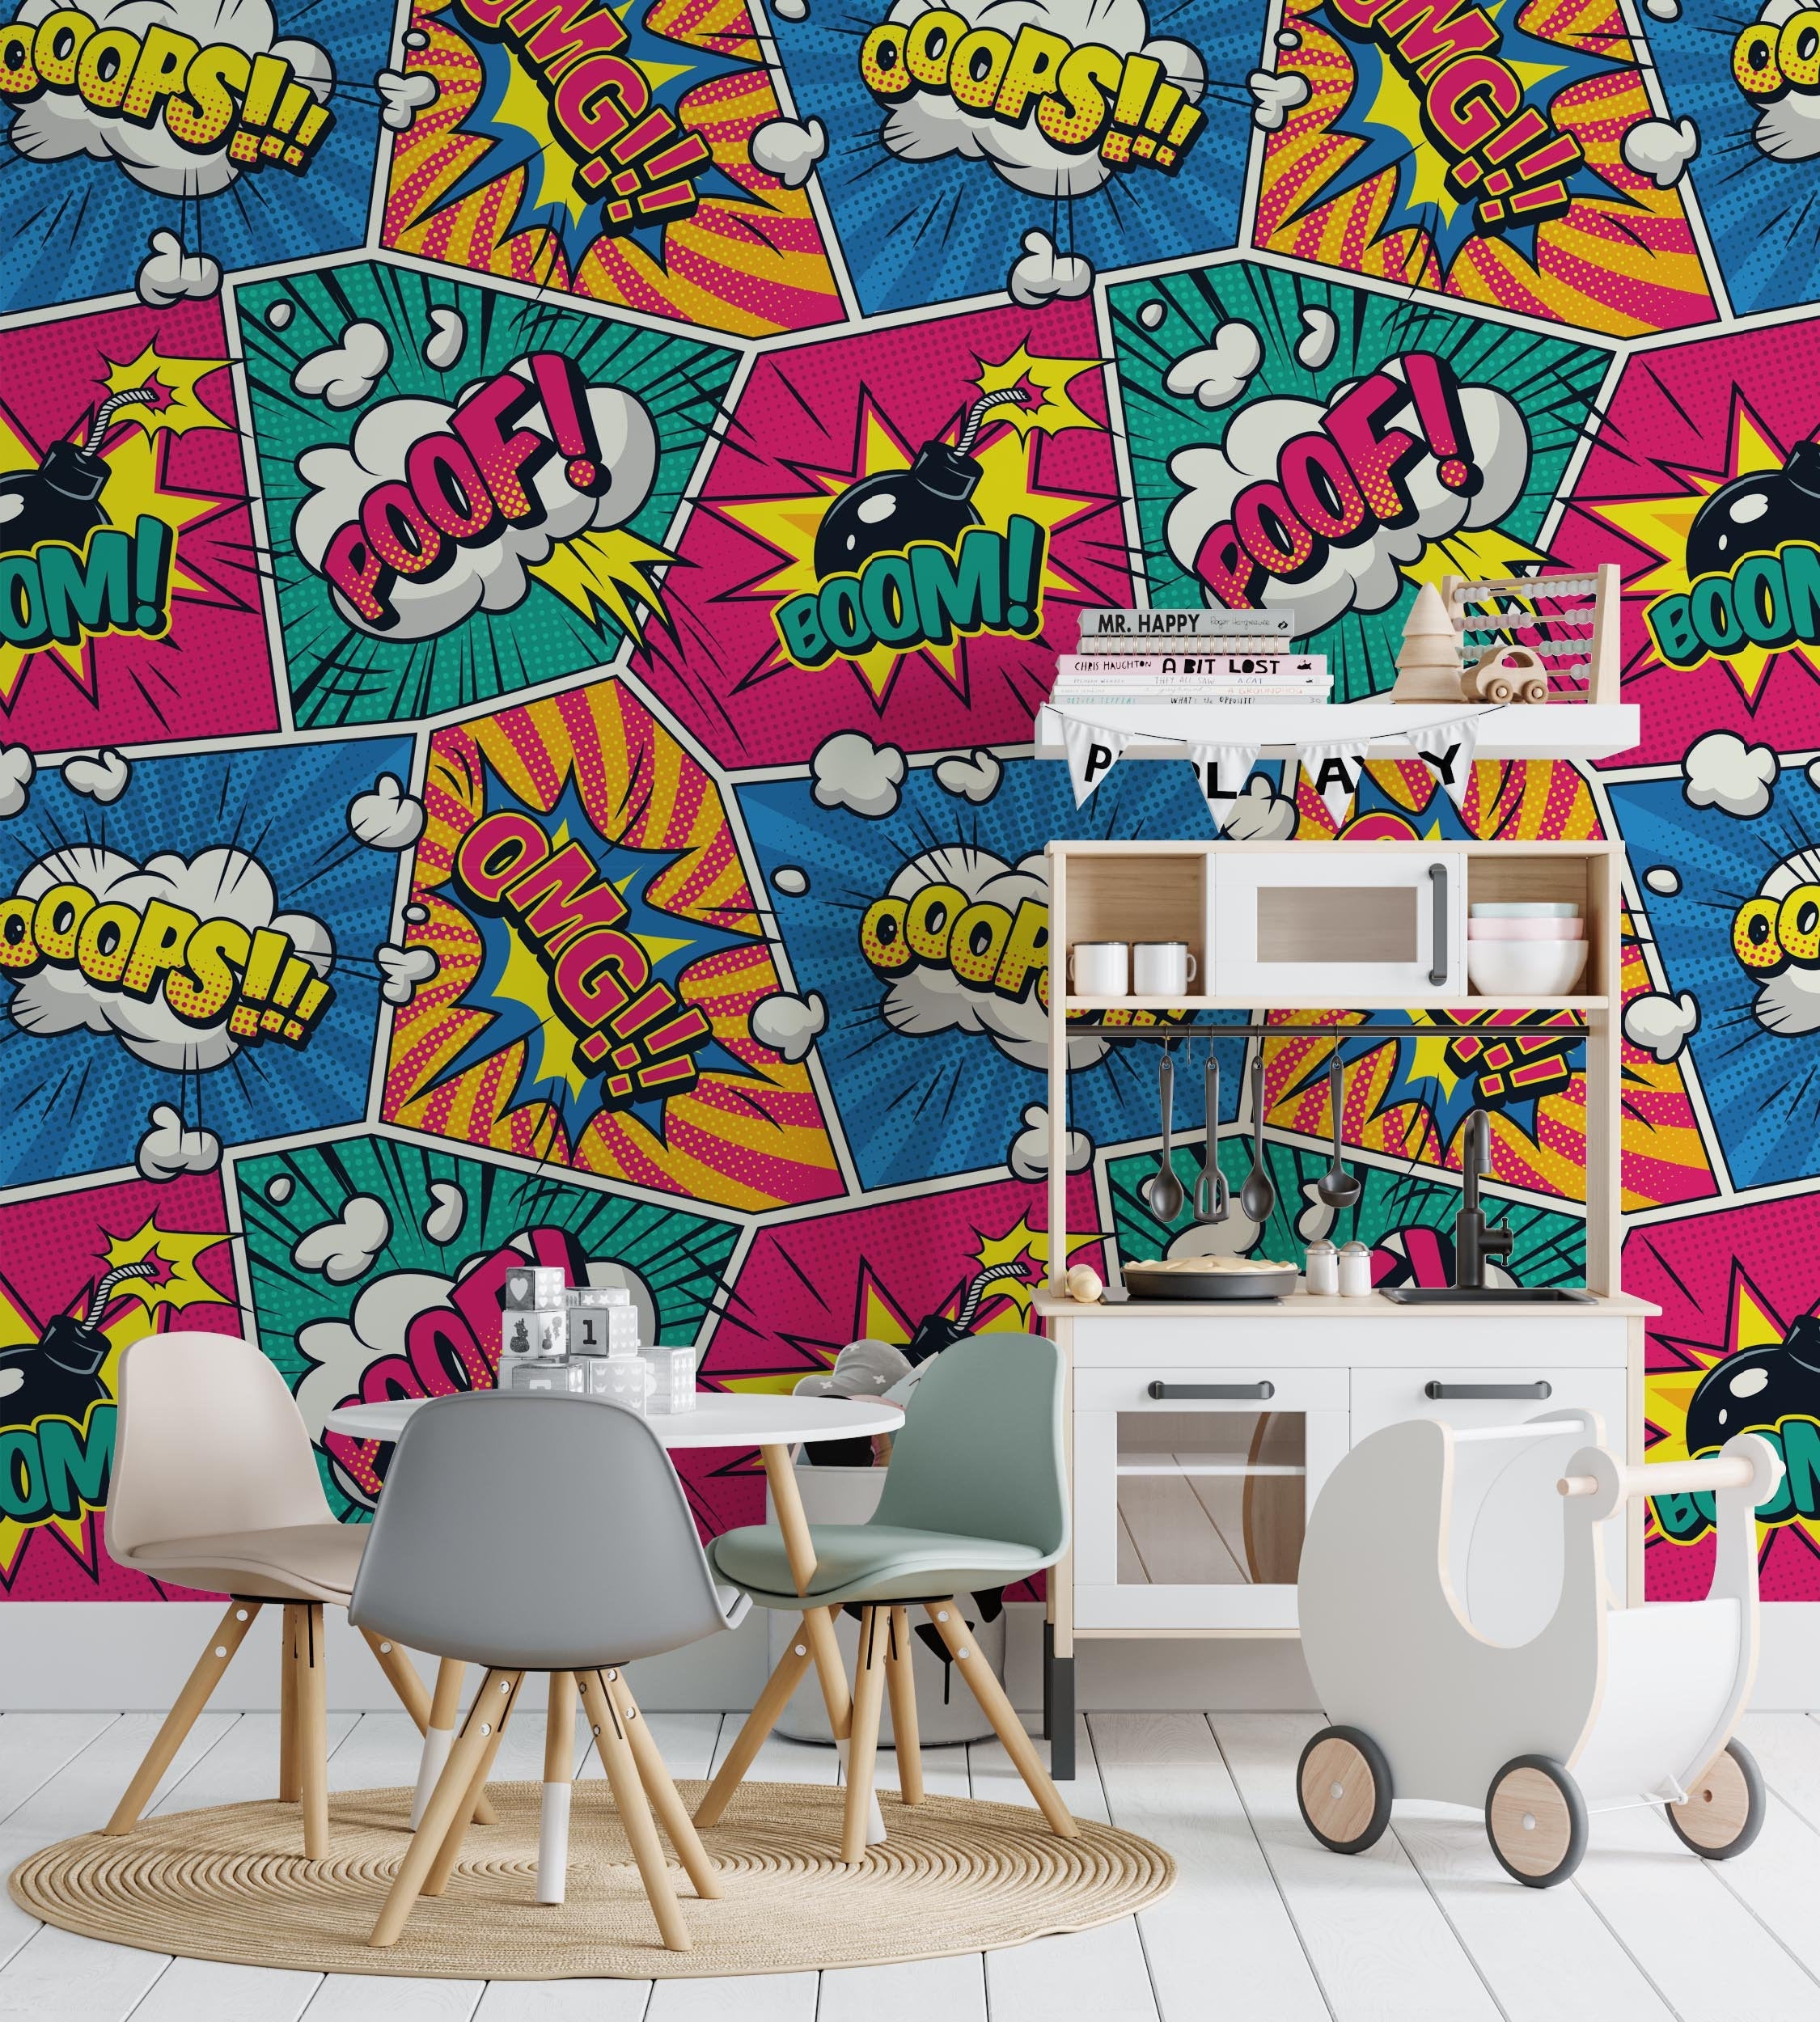 Comic Colorful Speech Bubbles Wordings Smoke Clouds Radial Effects Wallpaper Self Adhesive Peel and Stick Wall Decoration Design Removable